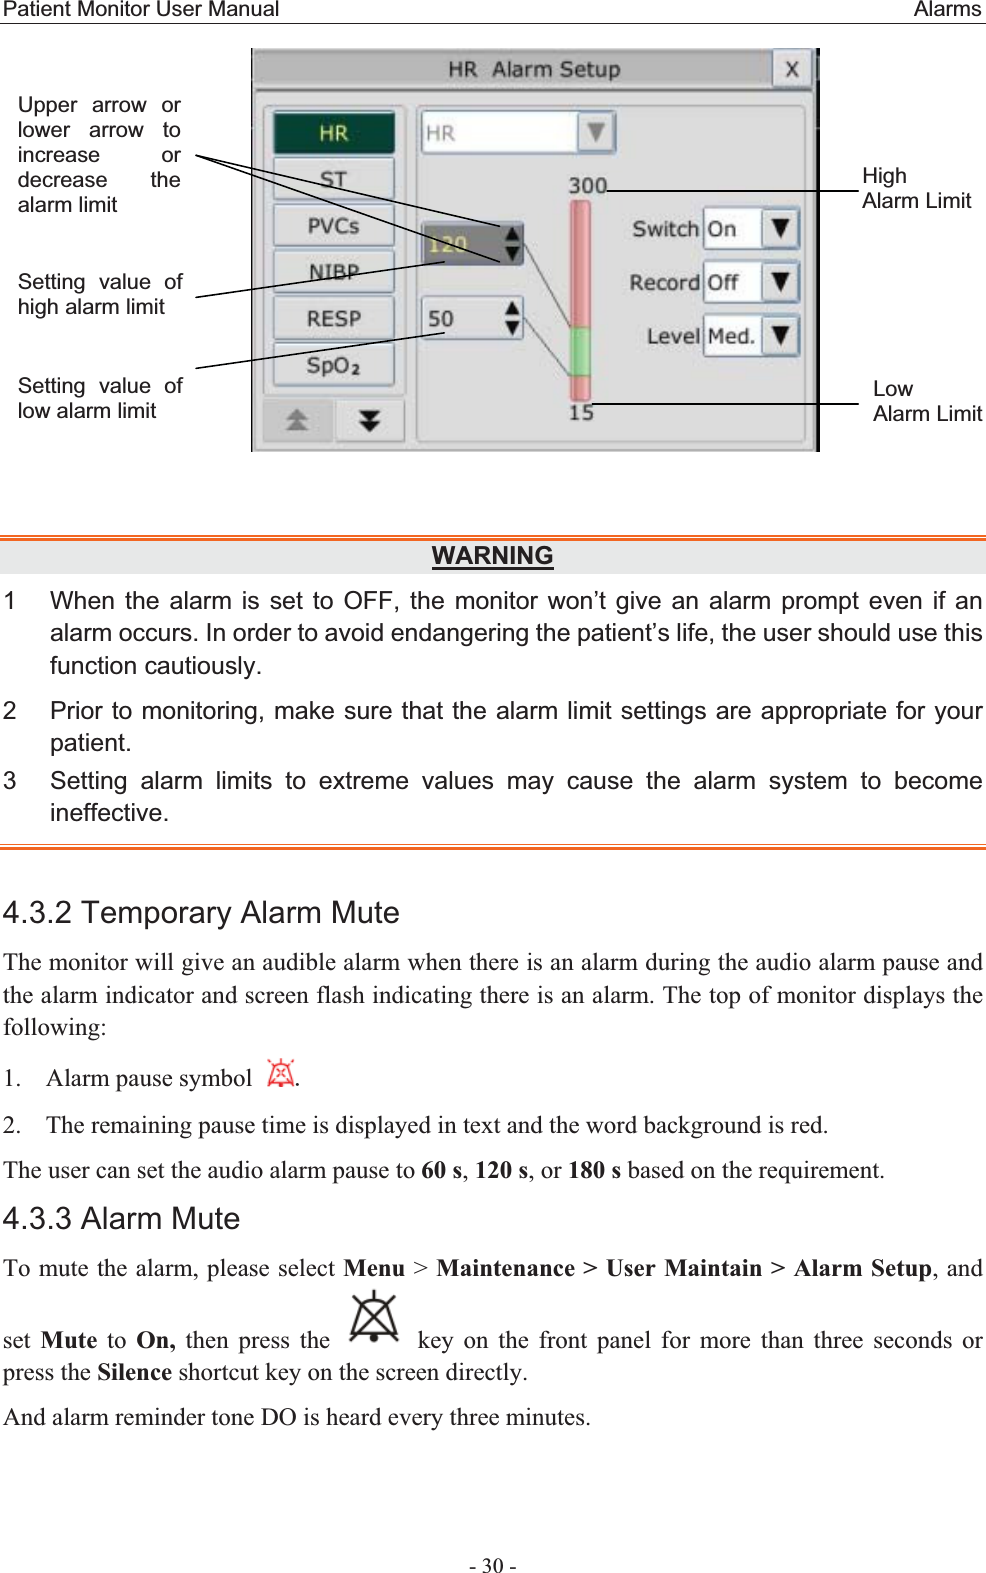 Patient Monitor User Manual                                                          Alarms  - 30 -   WARNING1  When the alarm is set to OFF, the monitor won’t give an alarm prompt even if an alarm occurs. In order to avoid endangering the patient’s life, the user should use this function cautiously. 2  Prior to monitoring, make sure that the alarm limit settings are appropriate for your patient.3  Setting alarm limits to extreme values may cause the alarm system to become ineffective.4.3.2 Temporary Alarm Mute The monitor will give an audible alarm when there is an alarm during the audio alarm pause and the alarm indicator and screen flash indicating there is an alarm. The top of monitor displays the following: 1. Alarm pause symbol   2. The remaining pause time is displayed in text and the word background is red. The user can set the audio alarm pause to 60 s, 120 s, or 180 s based on the requirement. 4.3.3 Alarm Mute To mute the alarm, please select Menu &gt; Maintenance &gt; User Maintain &gt; Alarm Setup, and set  Mute to On, then press the   key on the front panel for more than three seconds or press the Silence shortcut key on the screen directly.   And alarm reminder tone DO is heard every three minutes.   Setting value of high alarm limit HighAlarm LimitLow  Alarm LimitUpper arrow or lower arrow to increase or decrease the alarm limit   Setting value of low alarm limit 